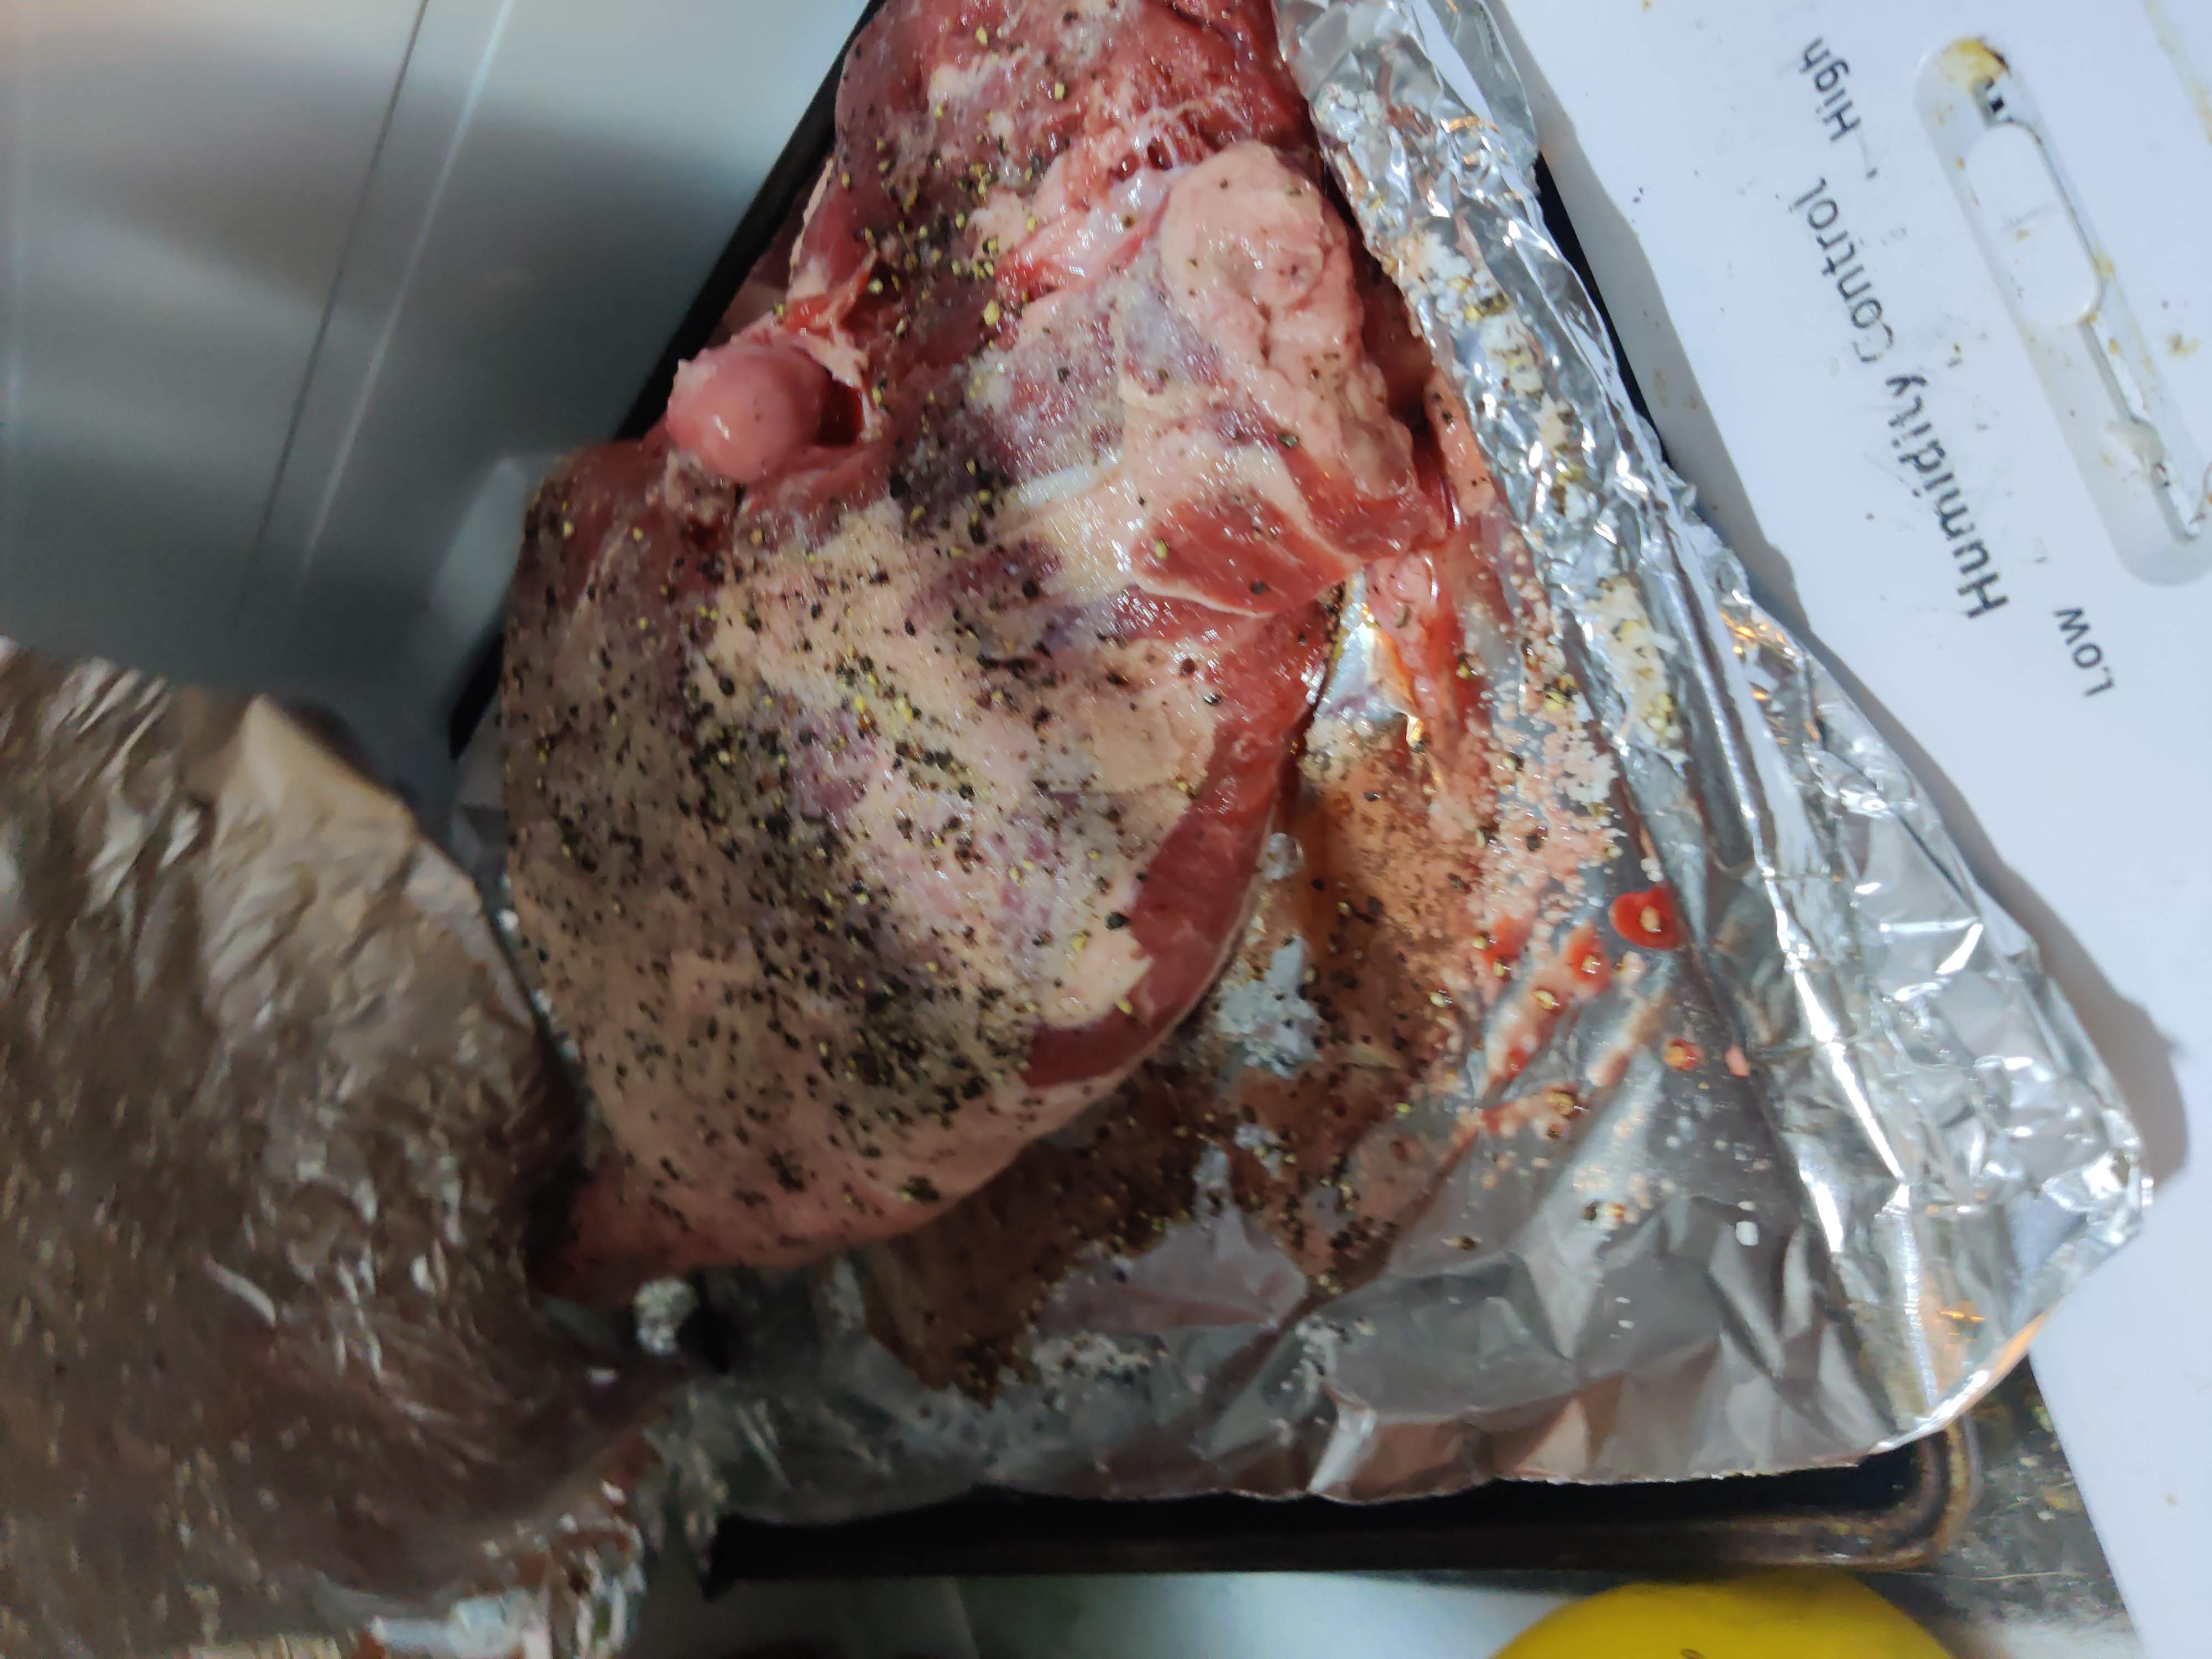 This is what the lamb looked like in the morning I was about to start
cooking it.